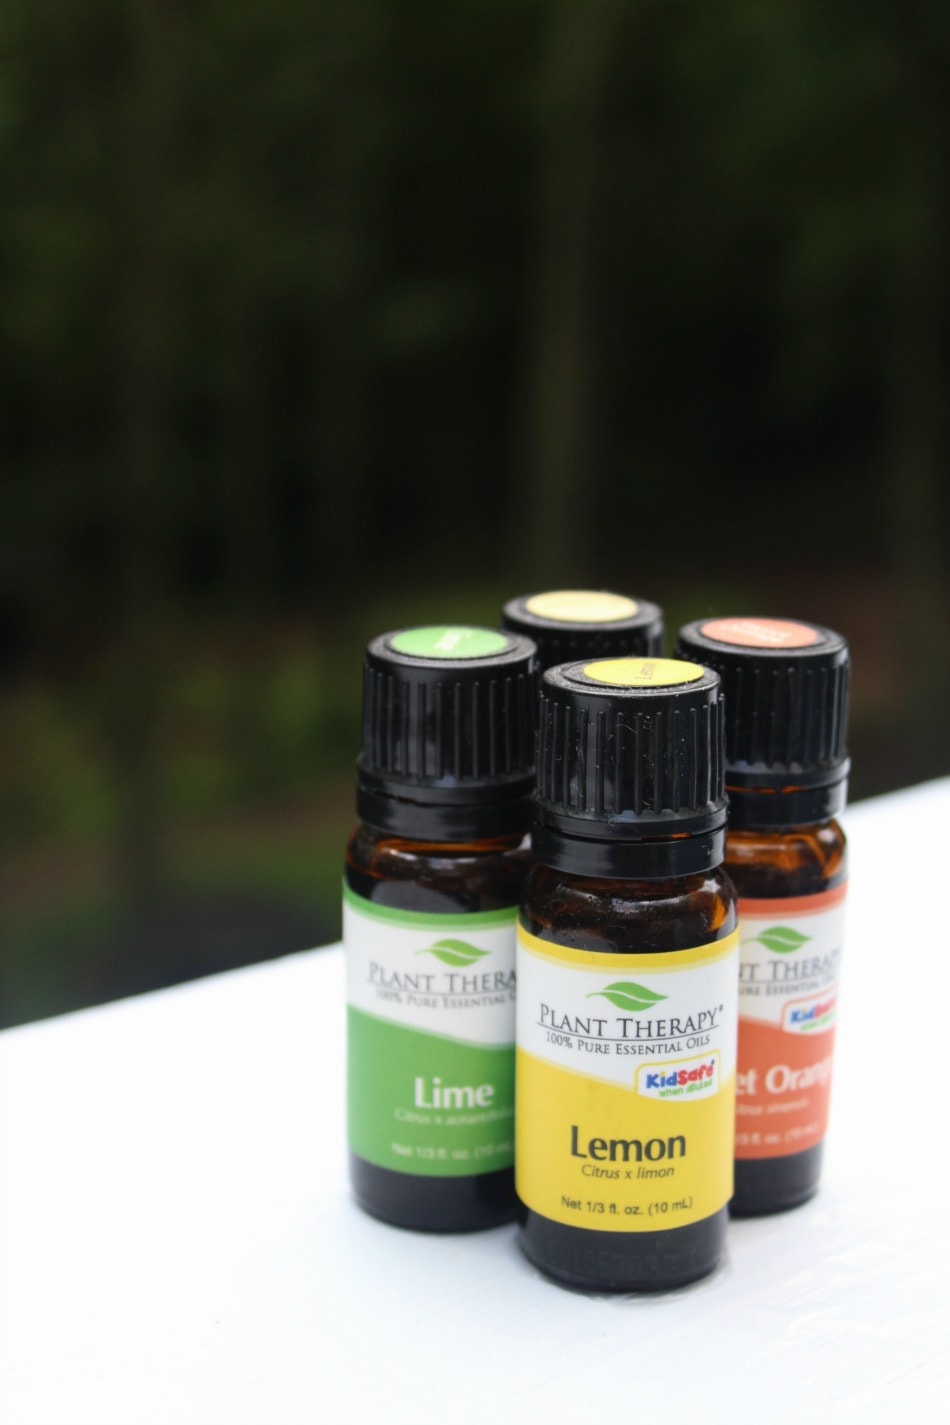 Phototoxic Essential Oils: What You Need To Know | Growing Up Herbal | Learn how to use essential oils safely this summer, especially when it comes to navigating the use of phototoxic essential oils!